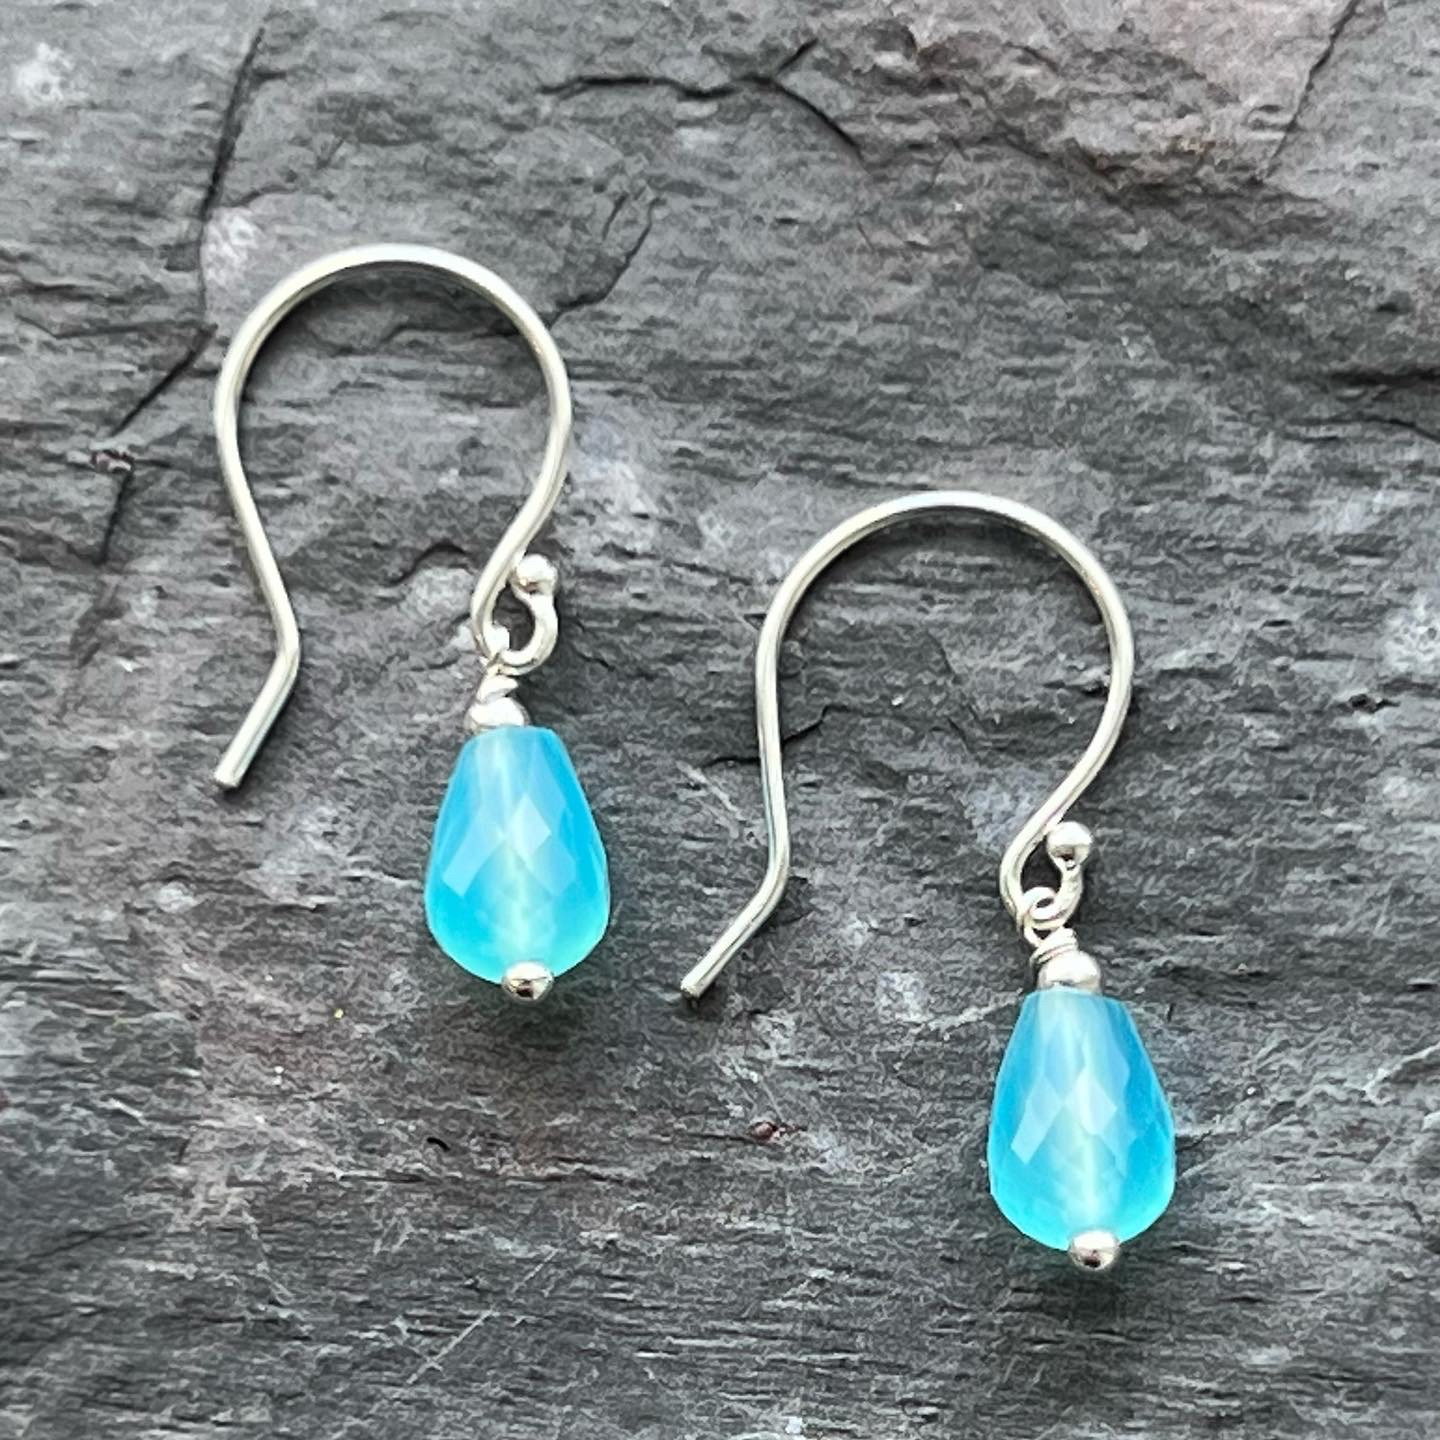 Santorini Blue Chalcedony Sterling earrings at Garden of Silver in Westhampton Beach, NY